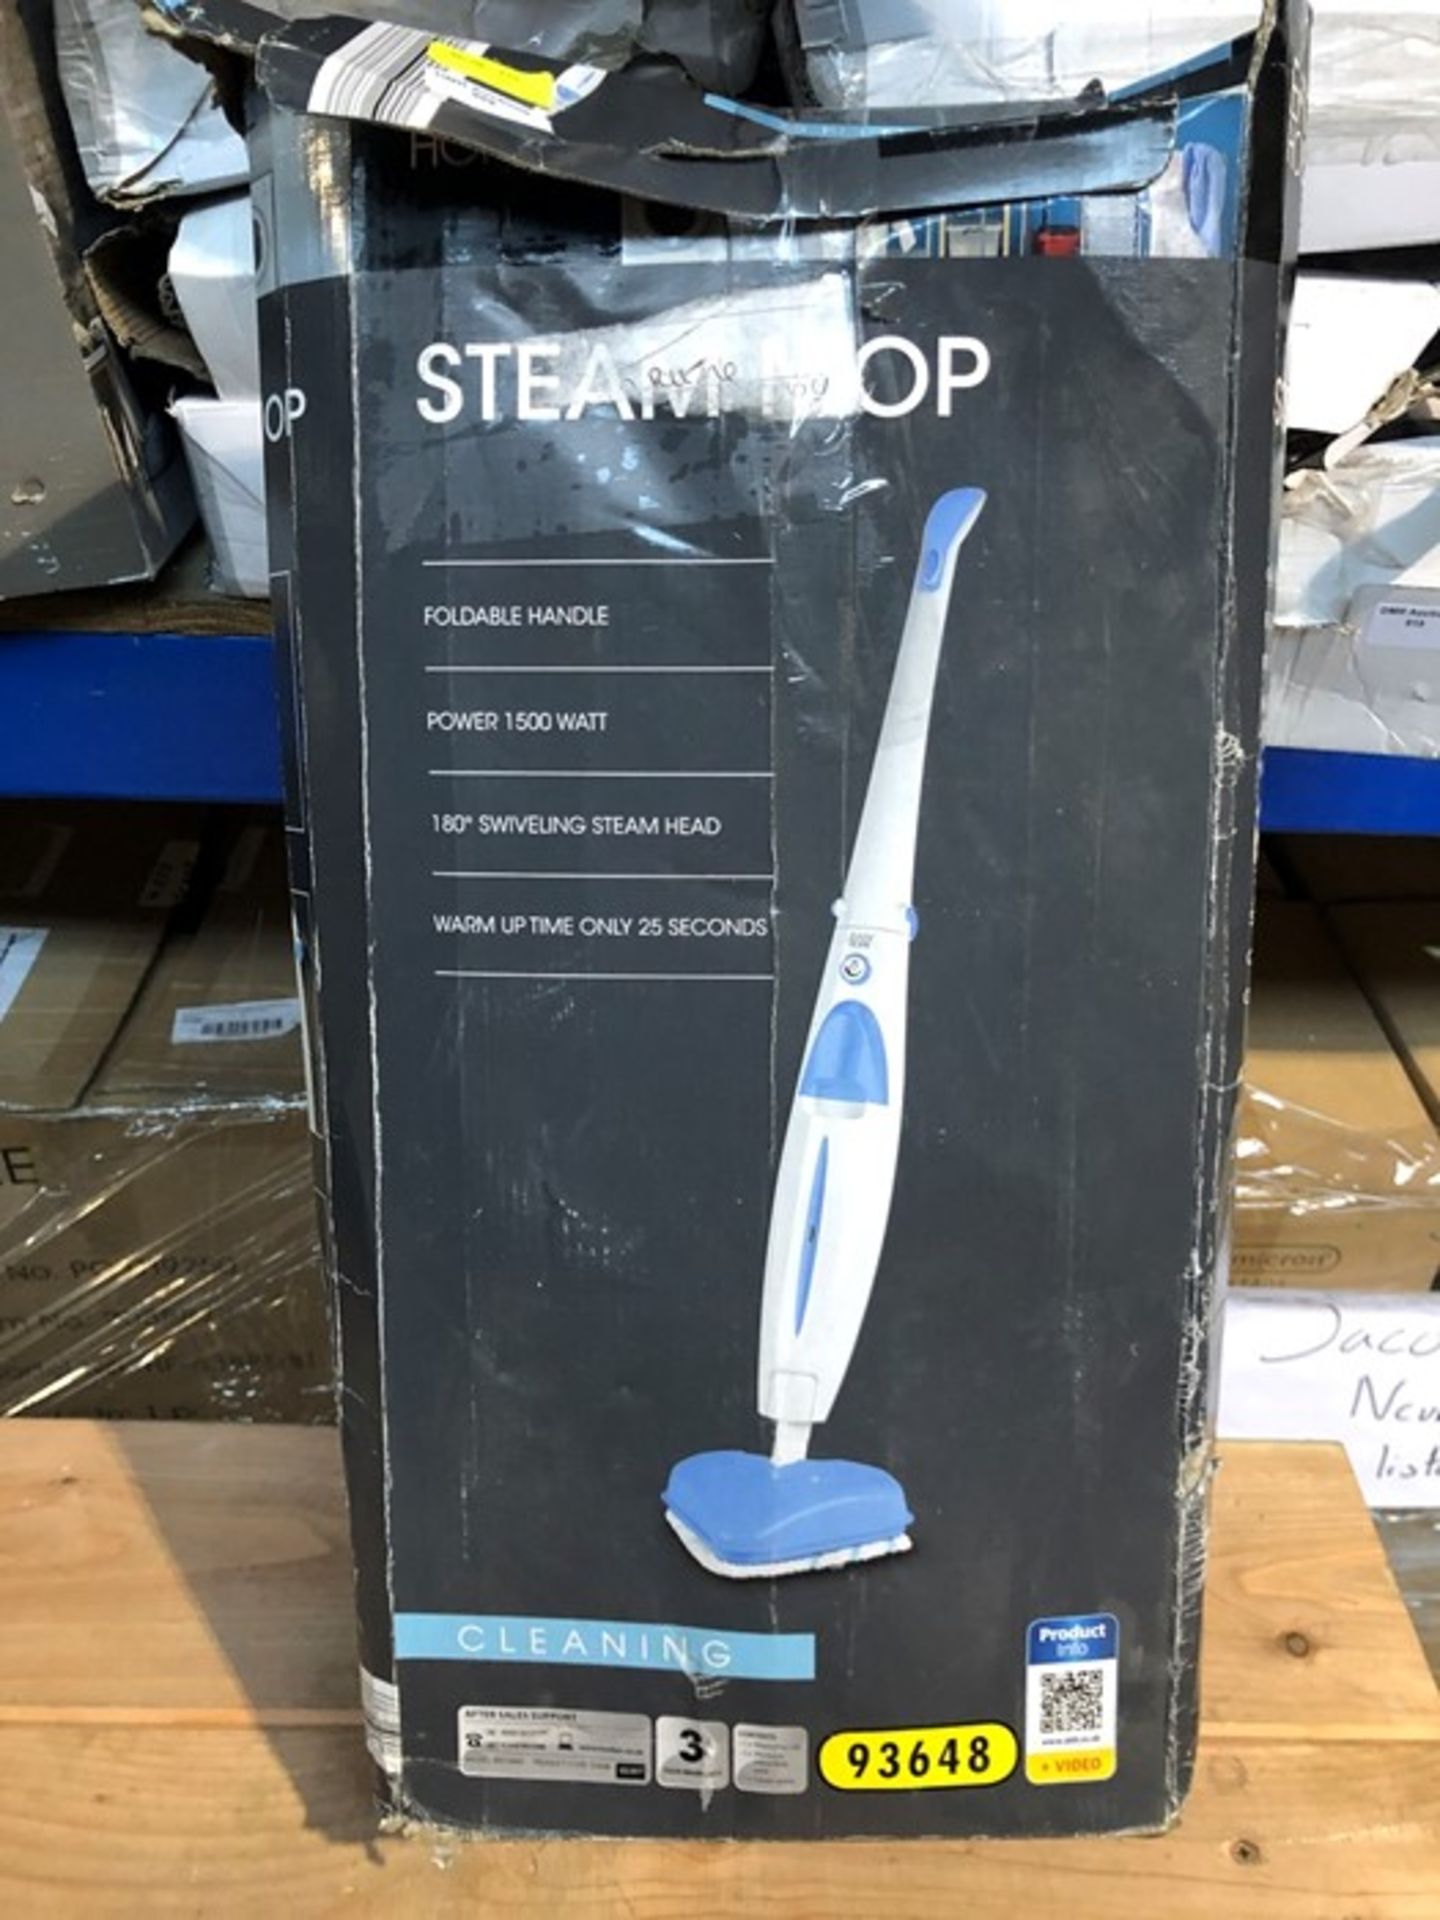 1 BOXED EASY HOME STEAM MOP / RRP £24.99 (PUBLIC VIEWING AVAILABLE)